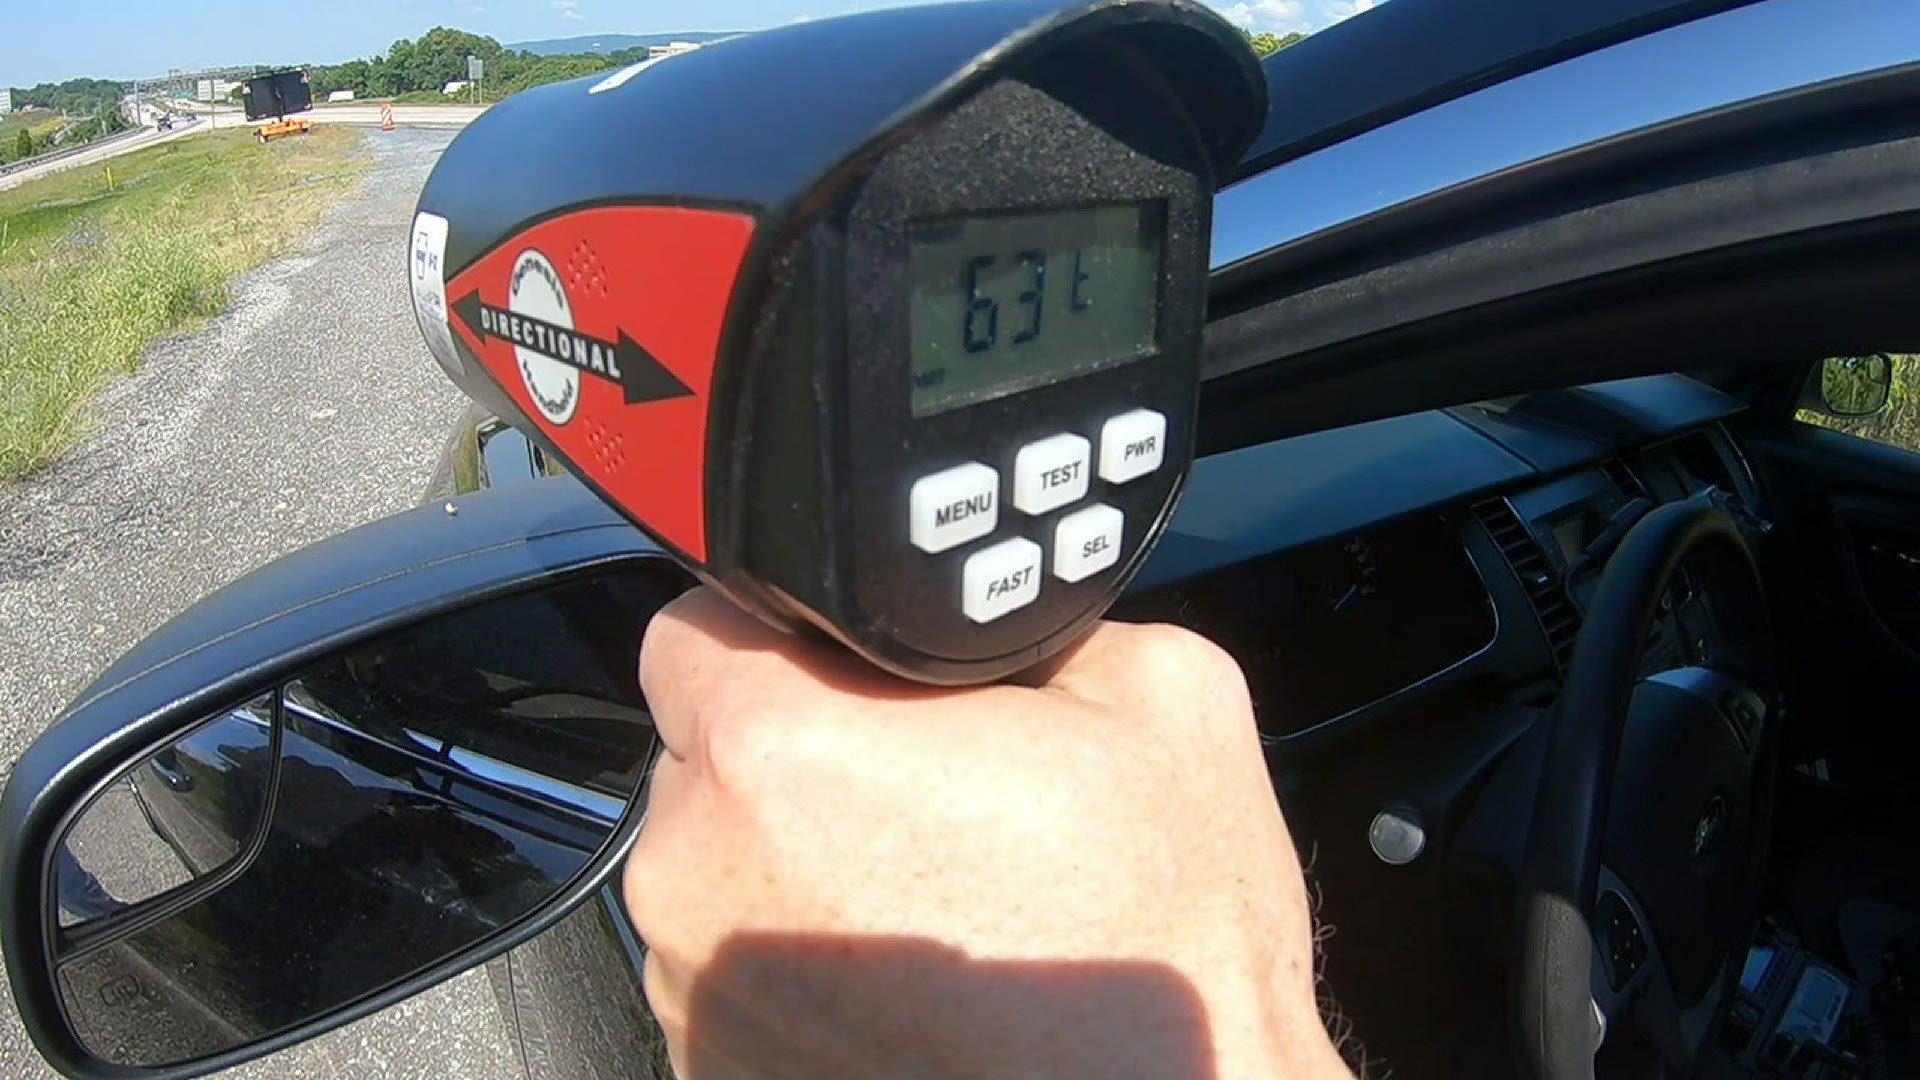 Pennsylvania is the only state in the country that doesn’t allow local police departments to use radar guns to catch speeding drivers.